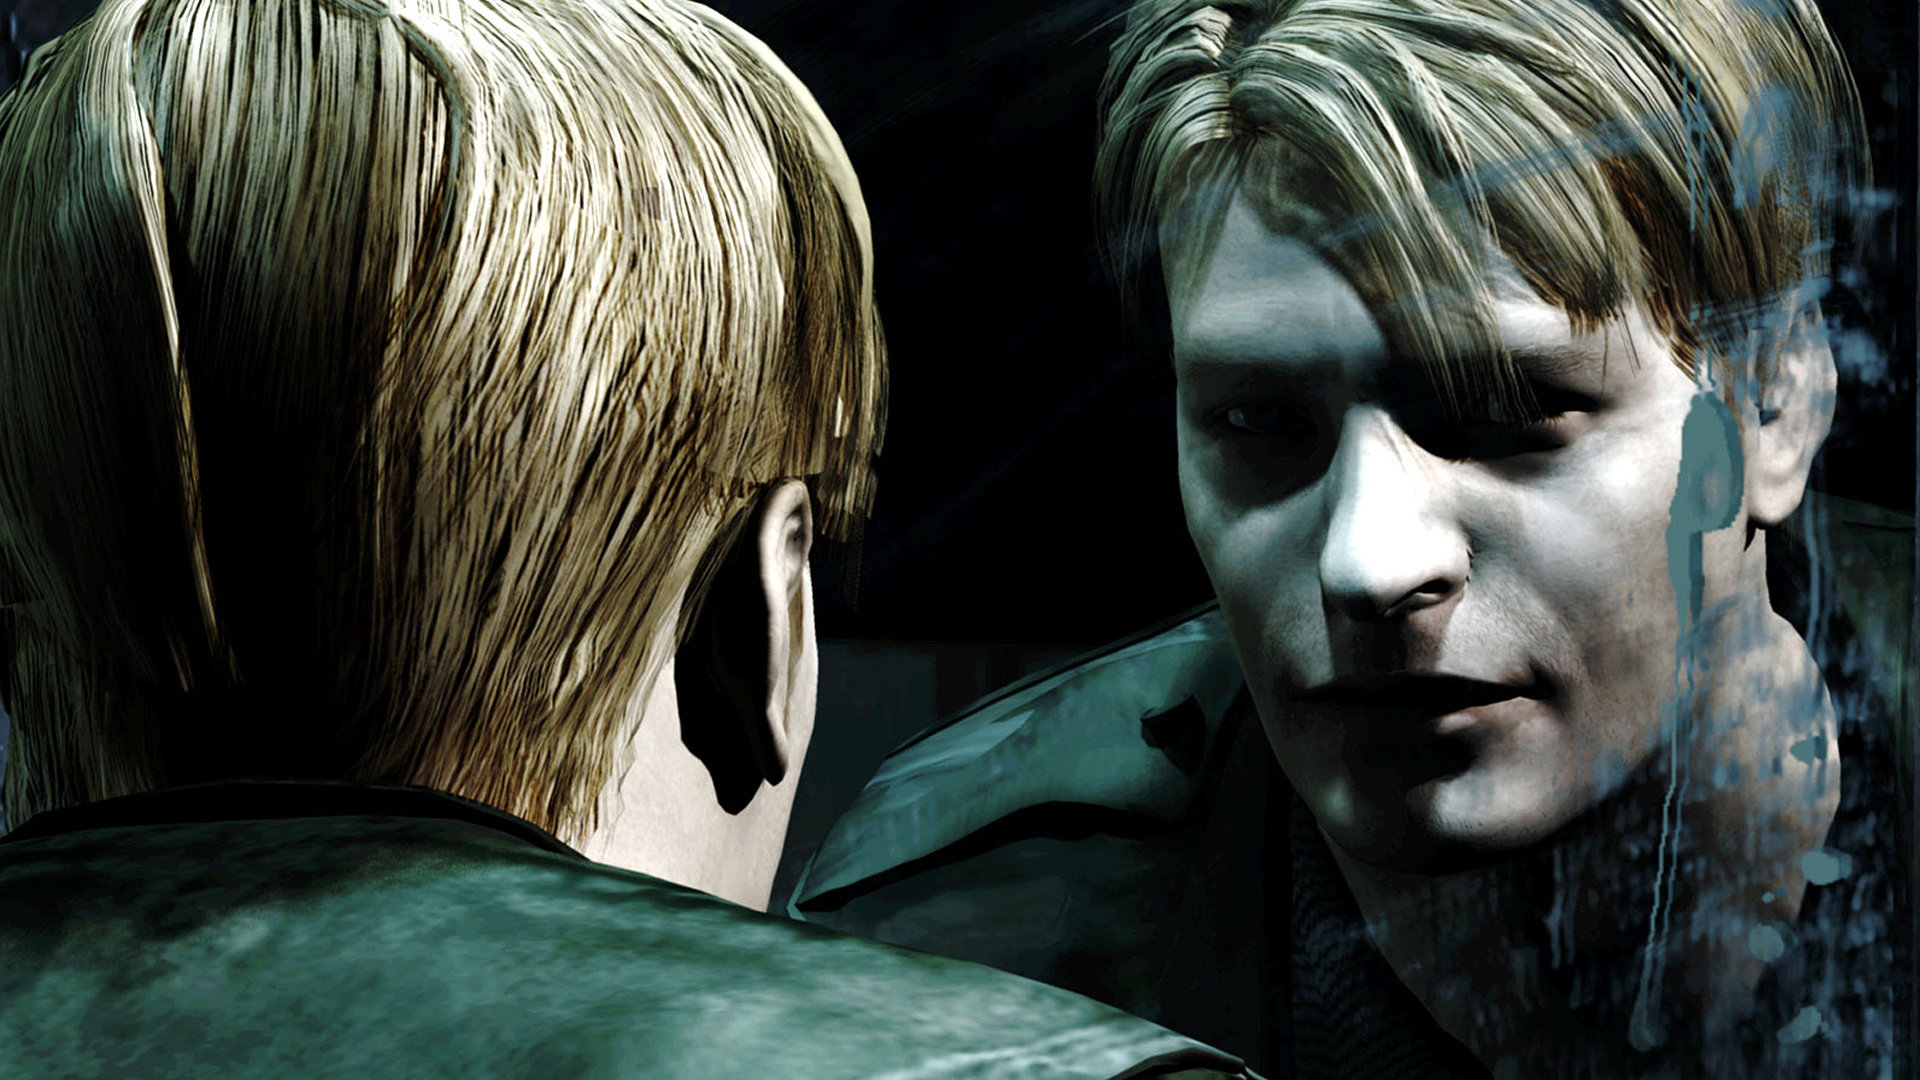 Silent Hill for PlayStation 5 should be released this year